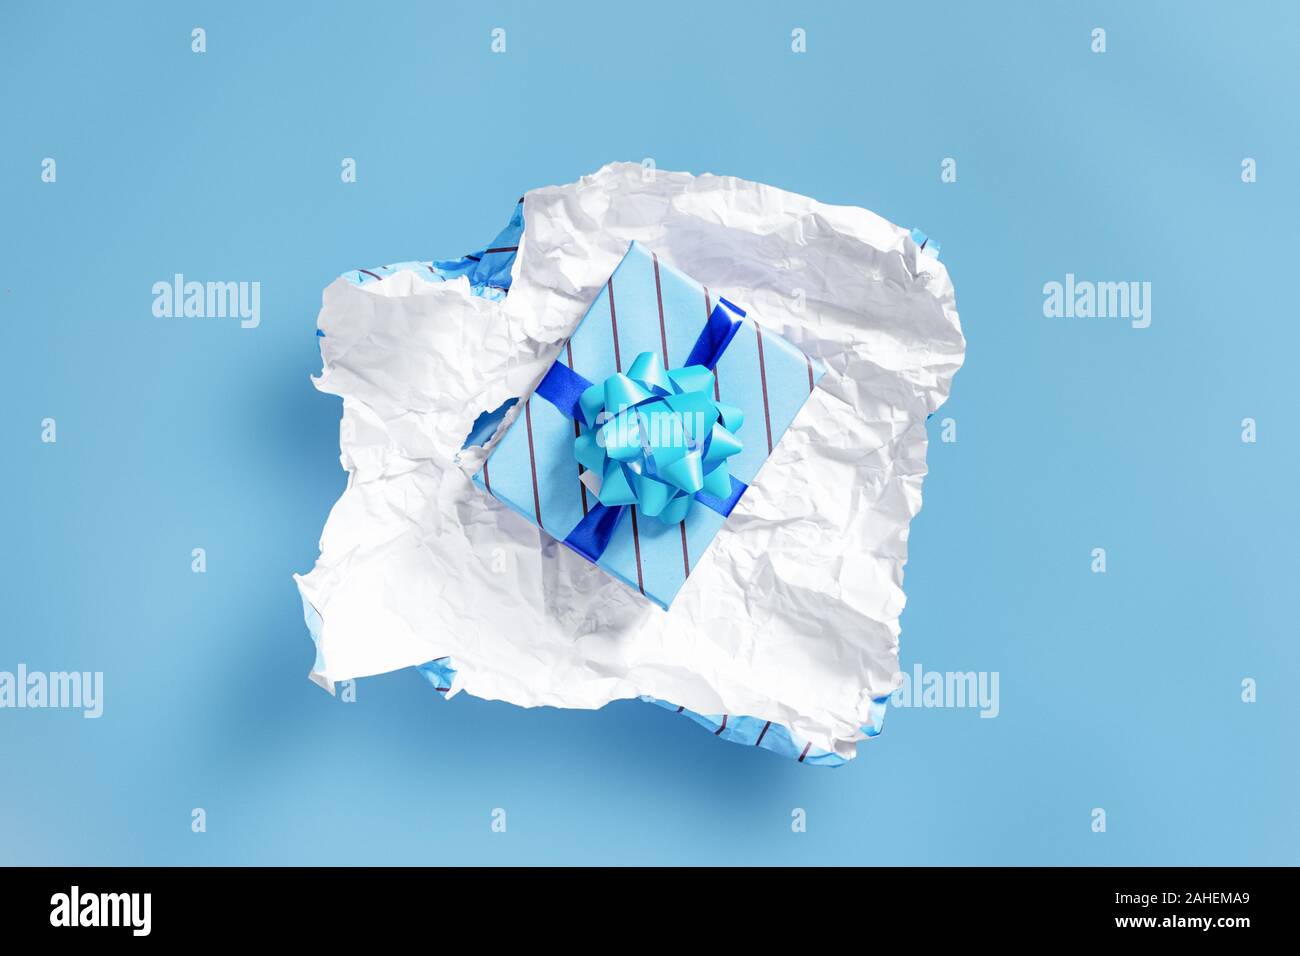 unwrapping present to find another layer of wrapping - Celebrations and events concept image with copy space for text. Stock Photo